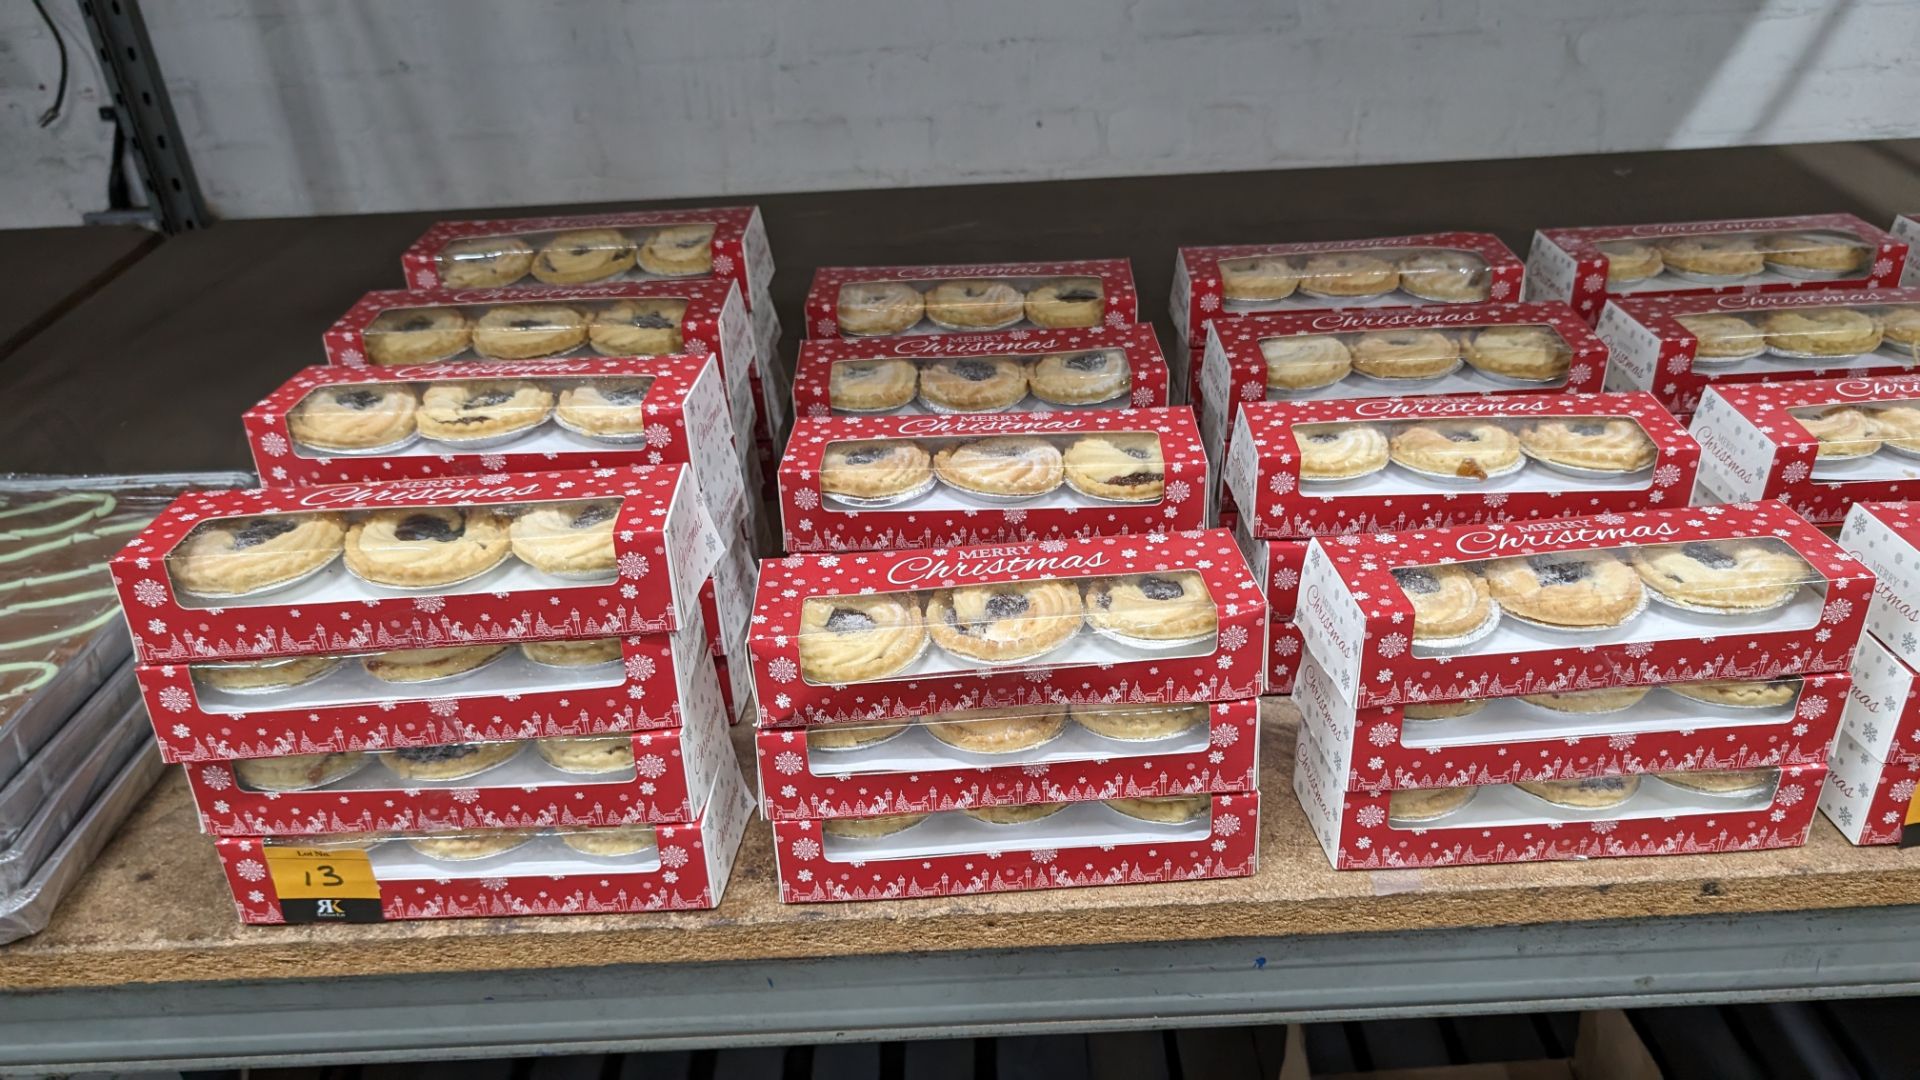 40 off 6 packs of Christmas mince pies. Each pack contains 6 pies on 2 layers & comes in Merry Chri - Image 2 of 10